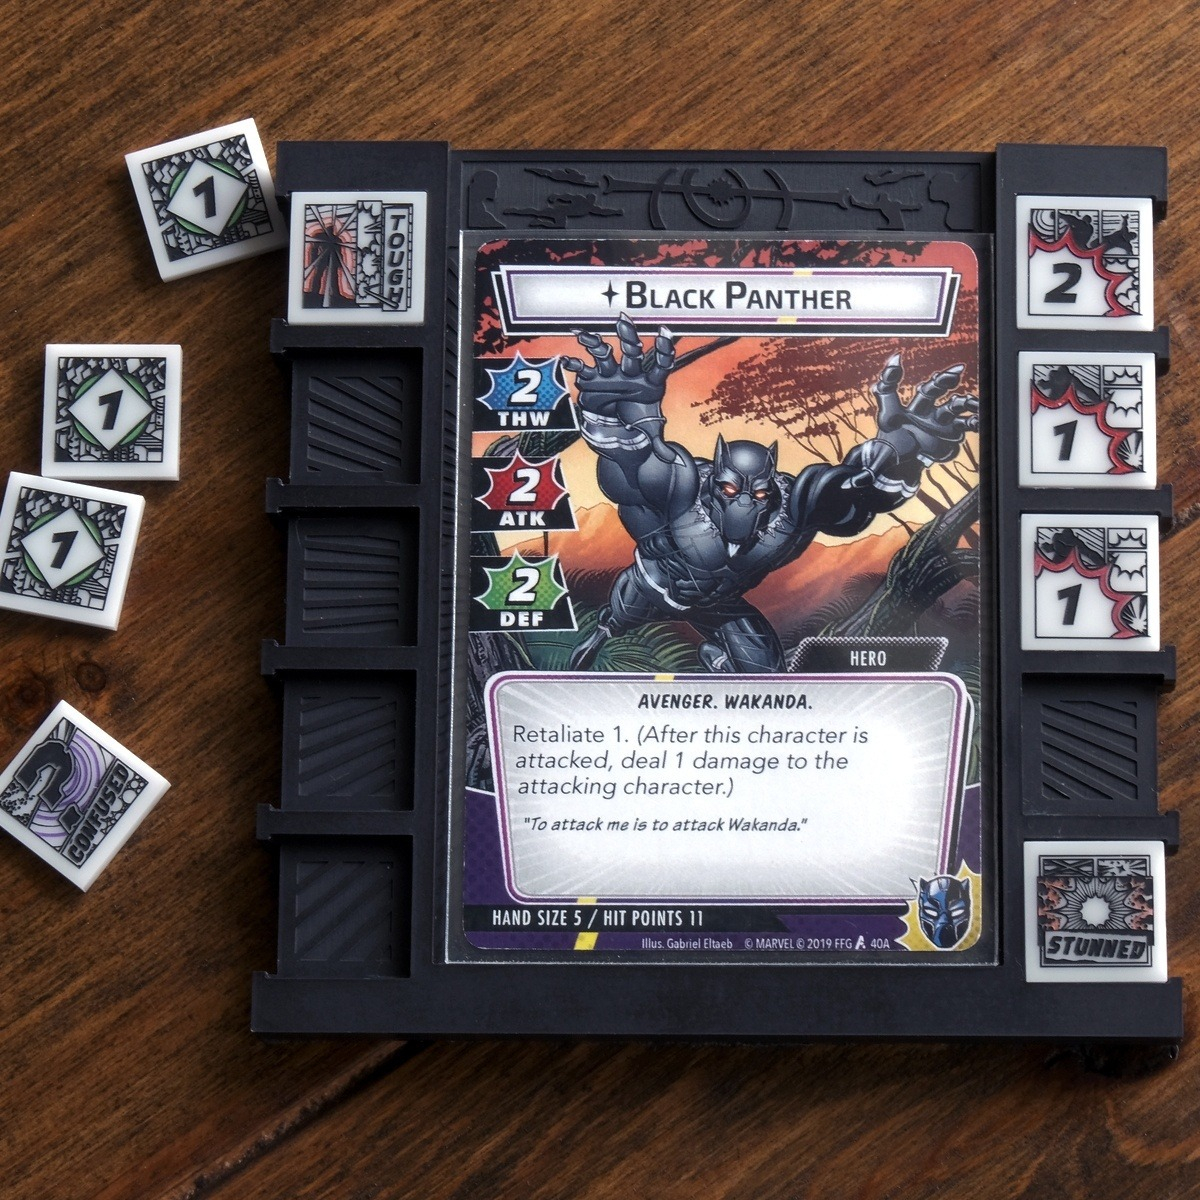 All designs from the full set of Hero Cosmic Tokens are displayed in and around a Cosmic Board featuring the card Black Panther from Marvel Champions LCG